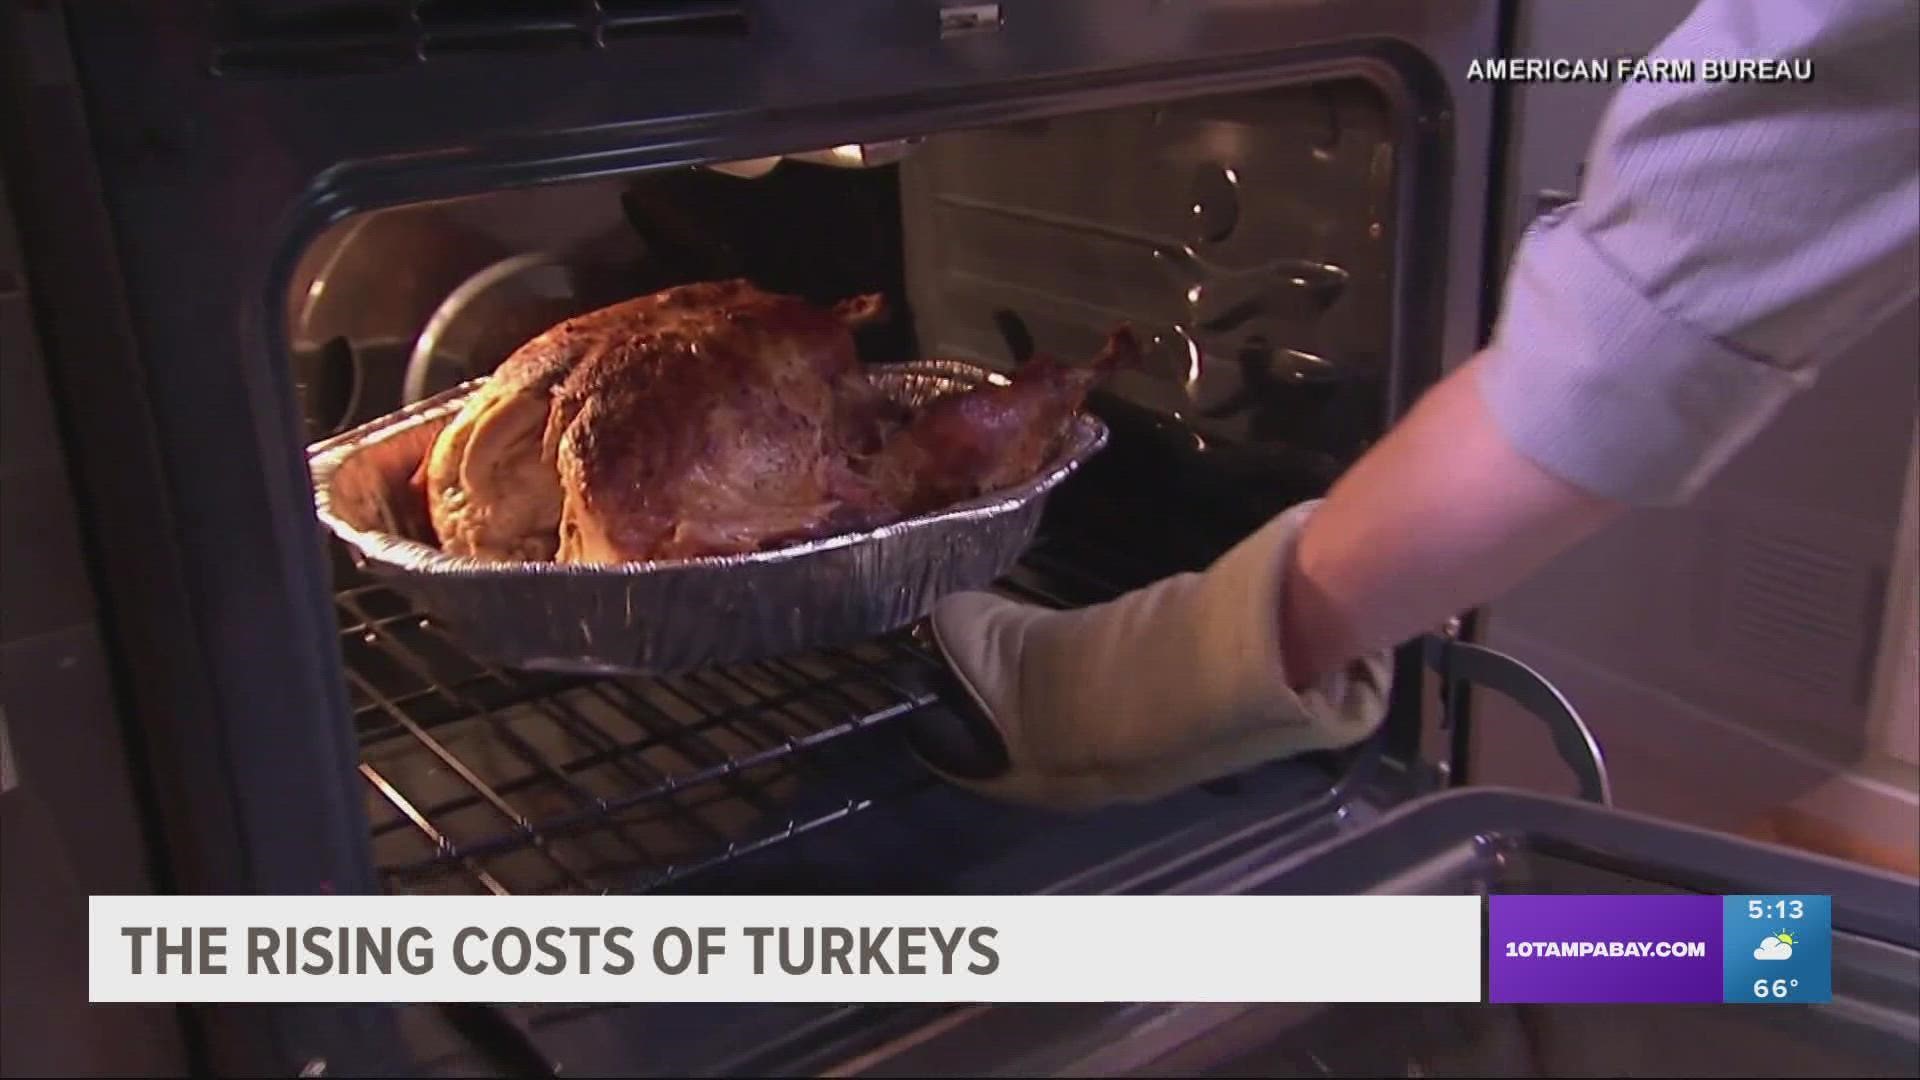 There are a lot of factors impacting turkey prices this year: the avian flu, costs of feed, supply chain slowdowns...